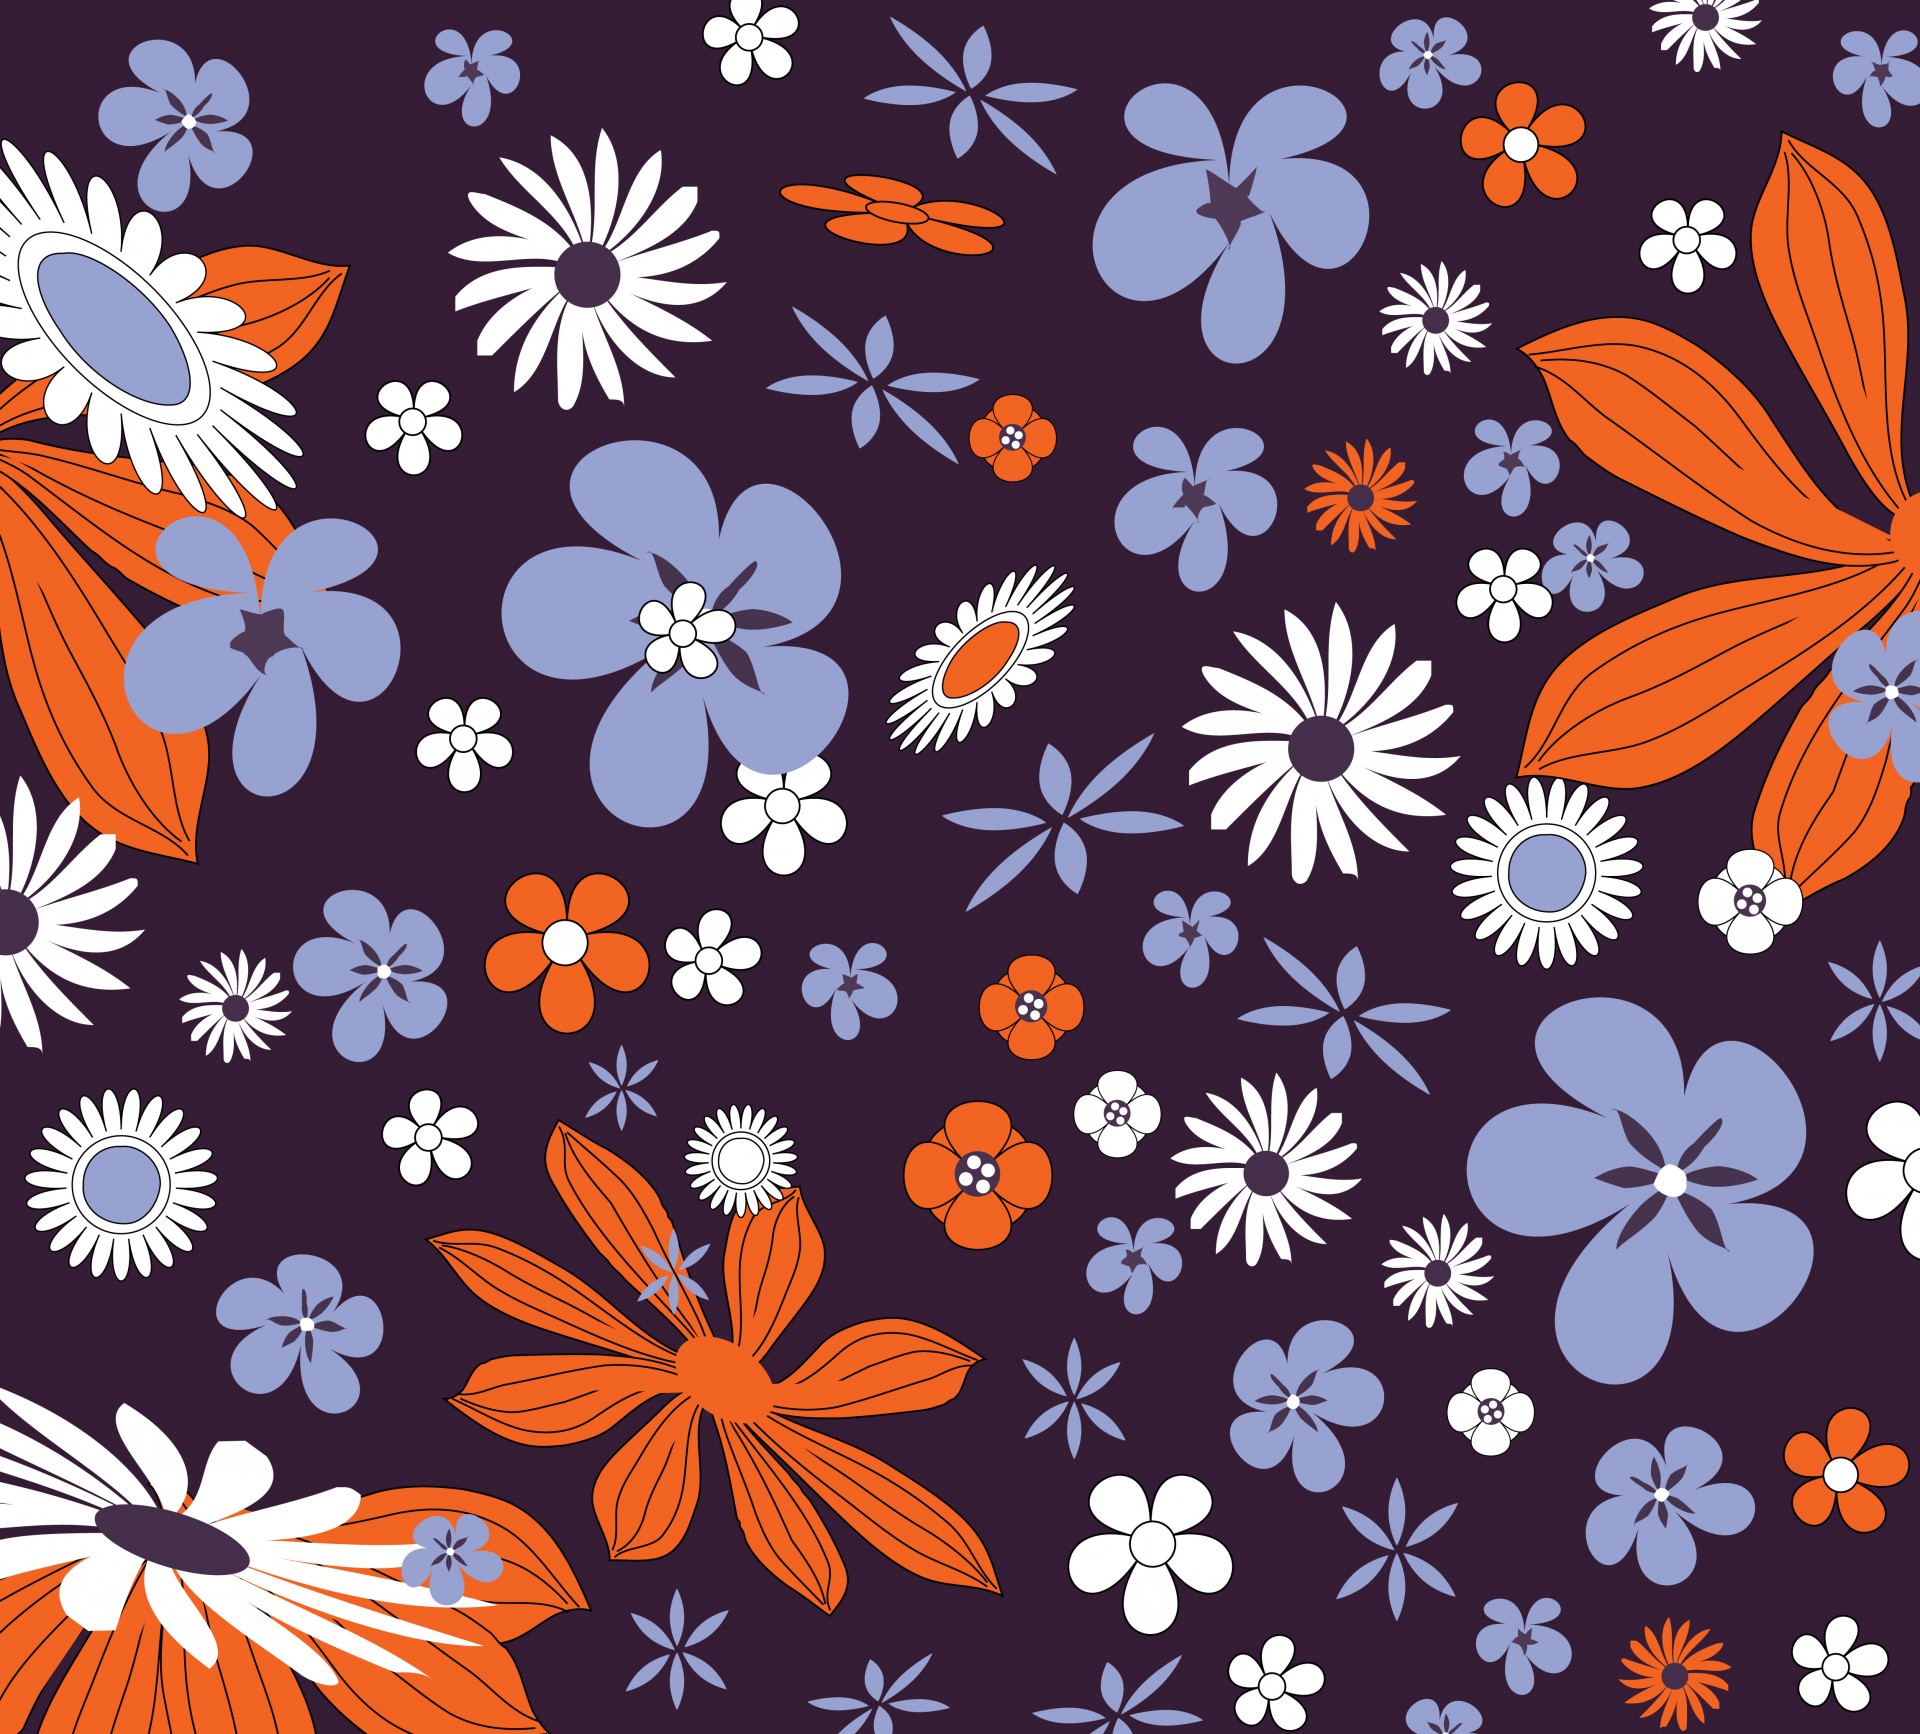 flowers floral pattern free photo